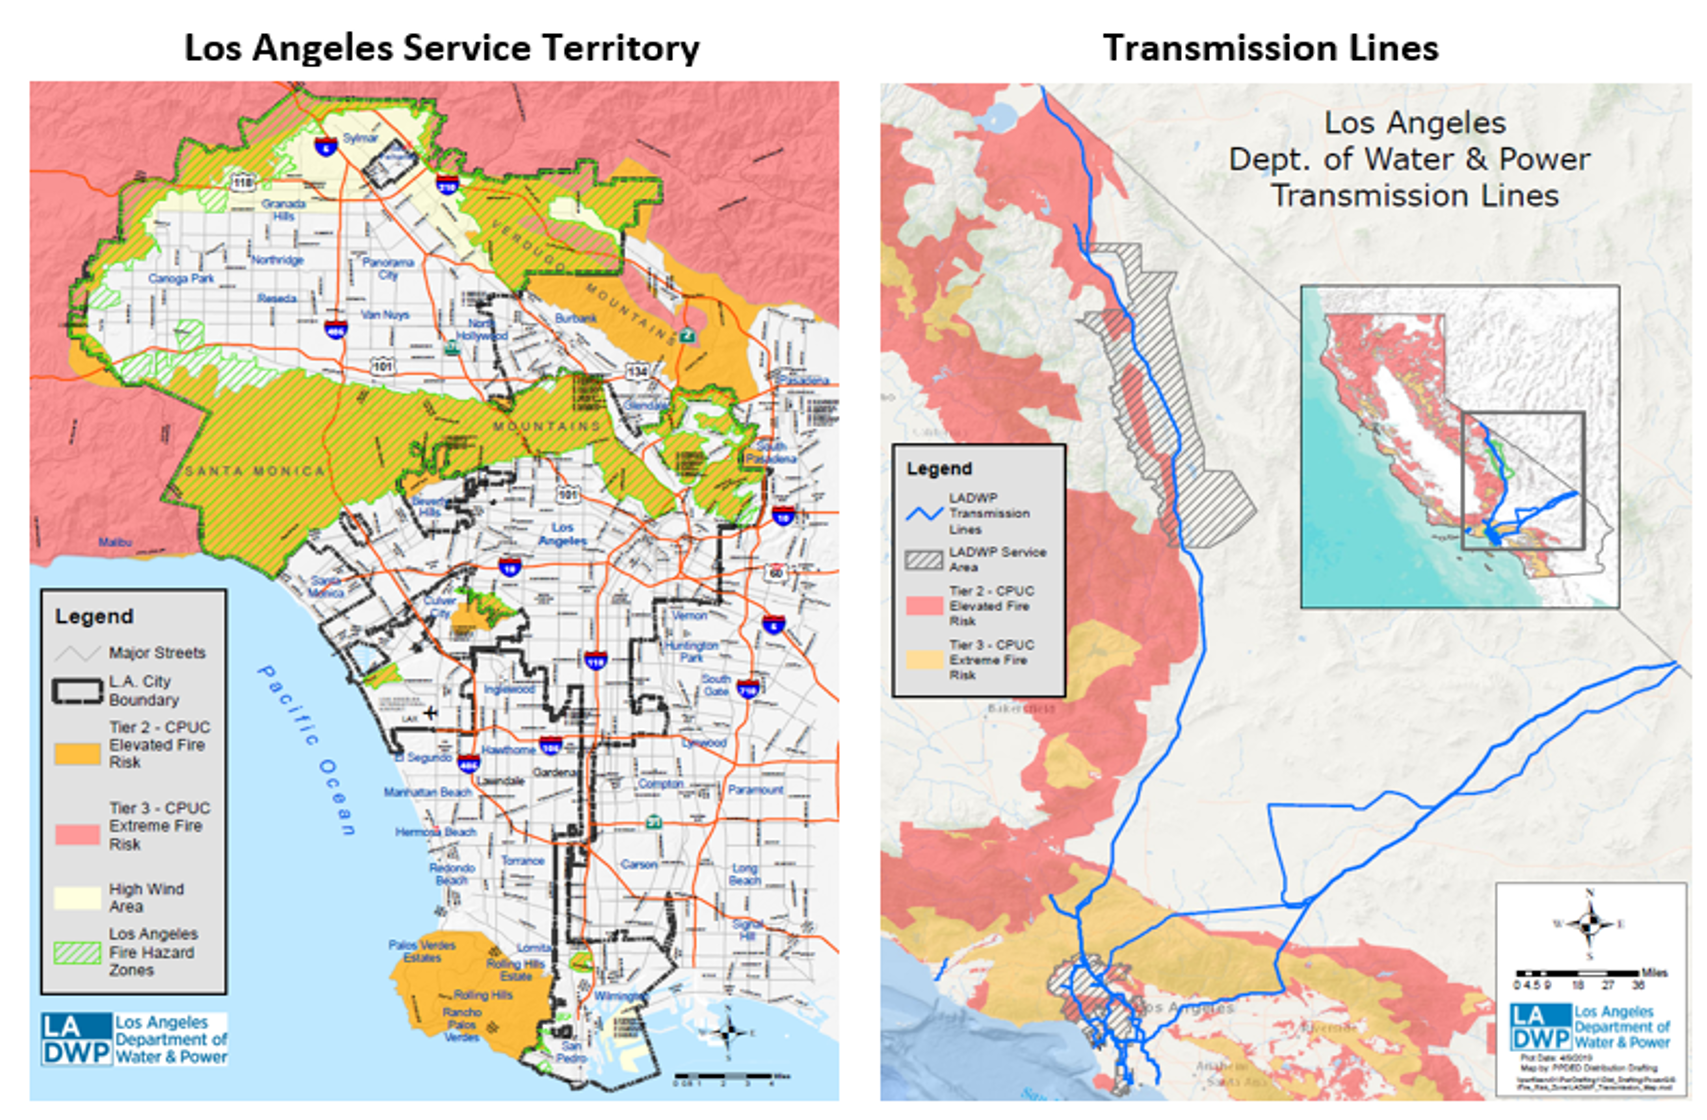 Los Angeles Service Territory and Transmission Lines